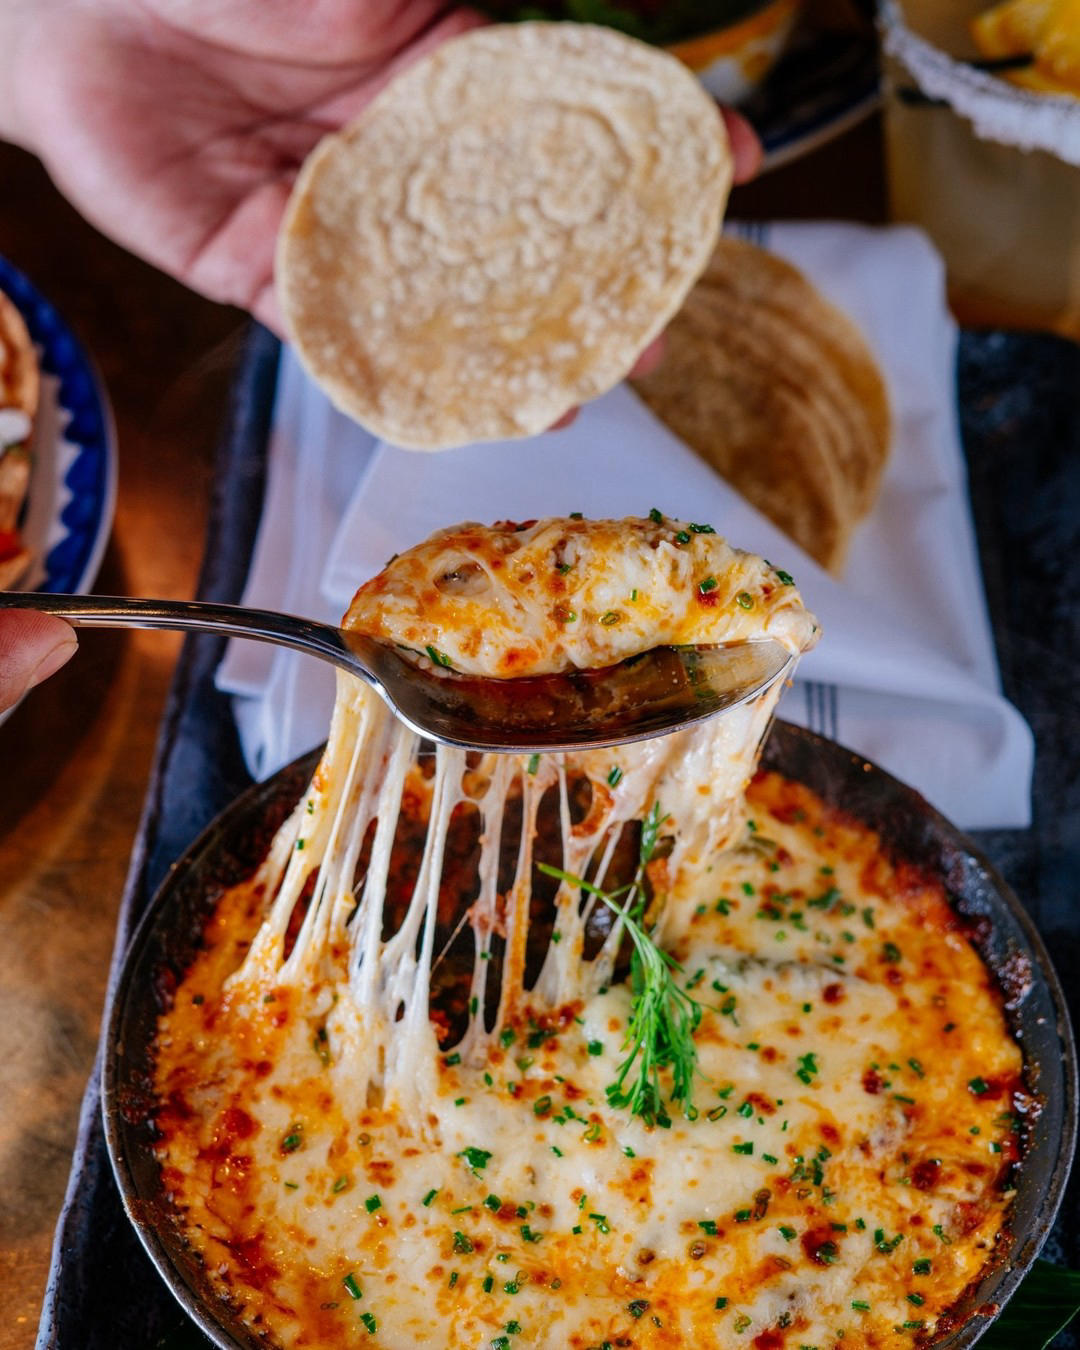 Bodega Negra Restaurant - Our Queso Fundido is the perfect appetizer to kick off your meal, made wit